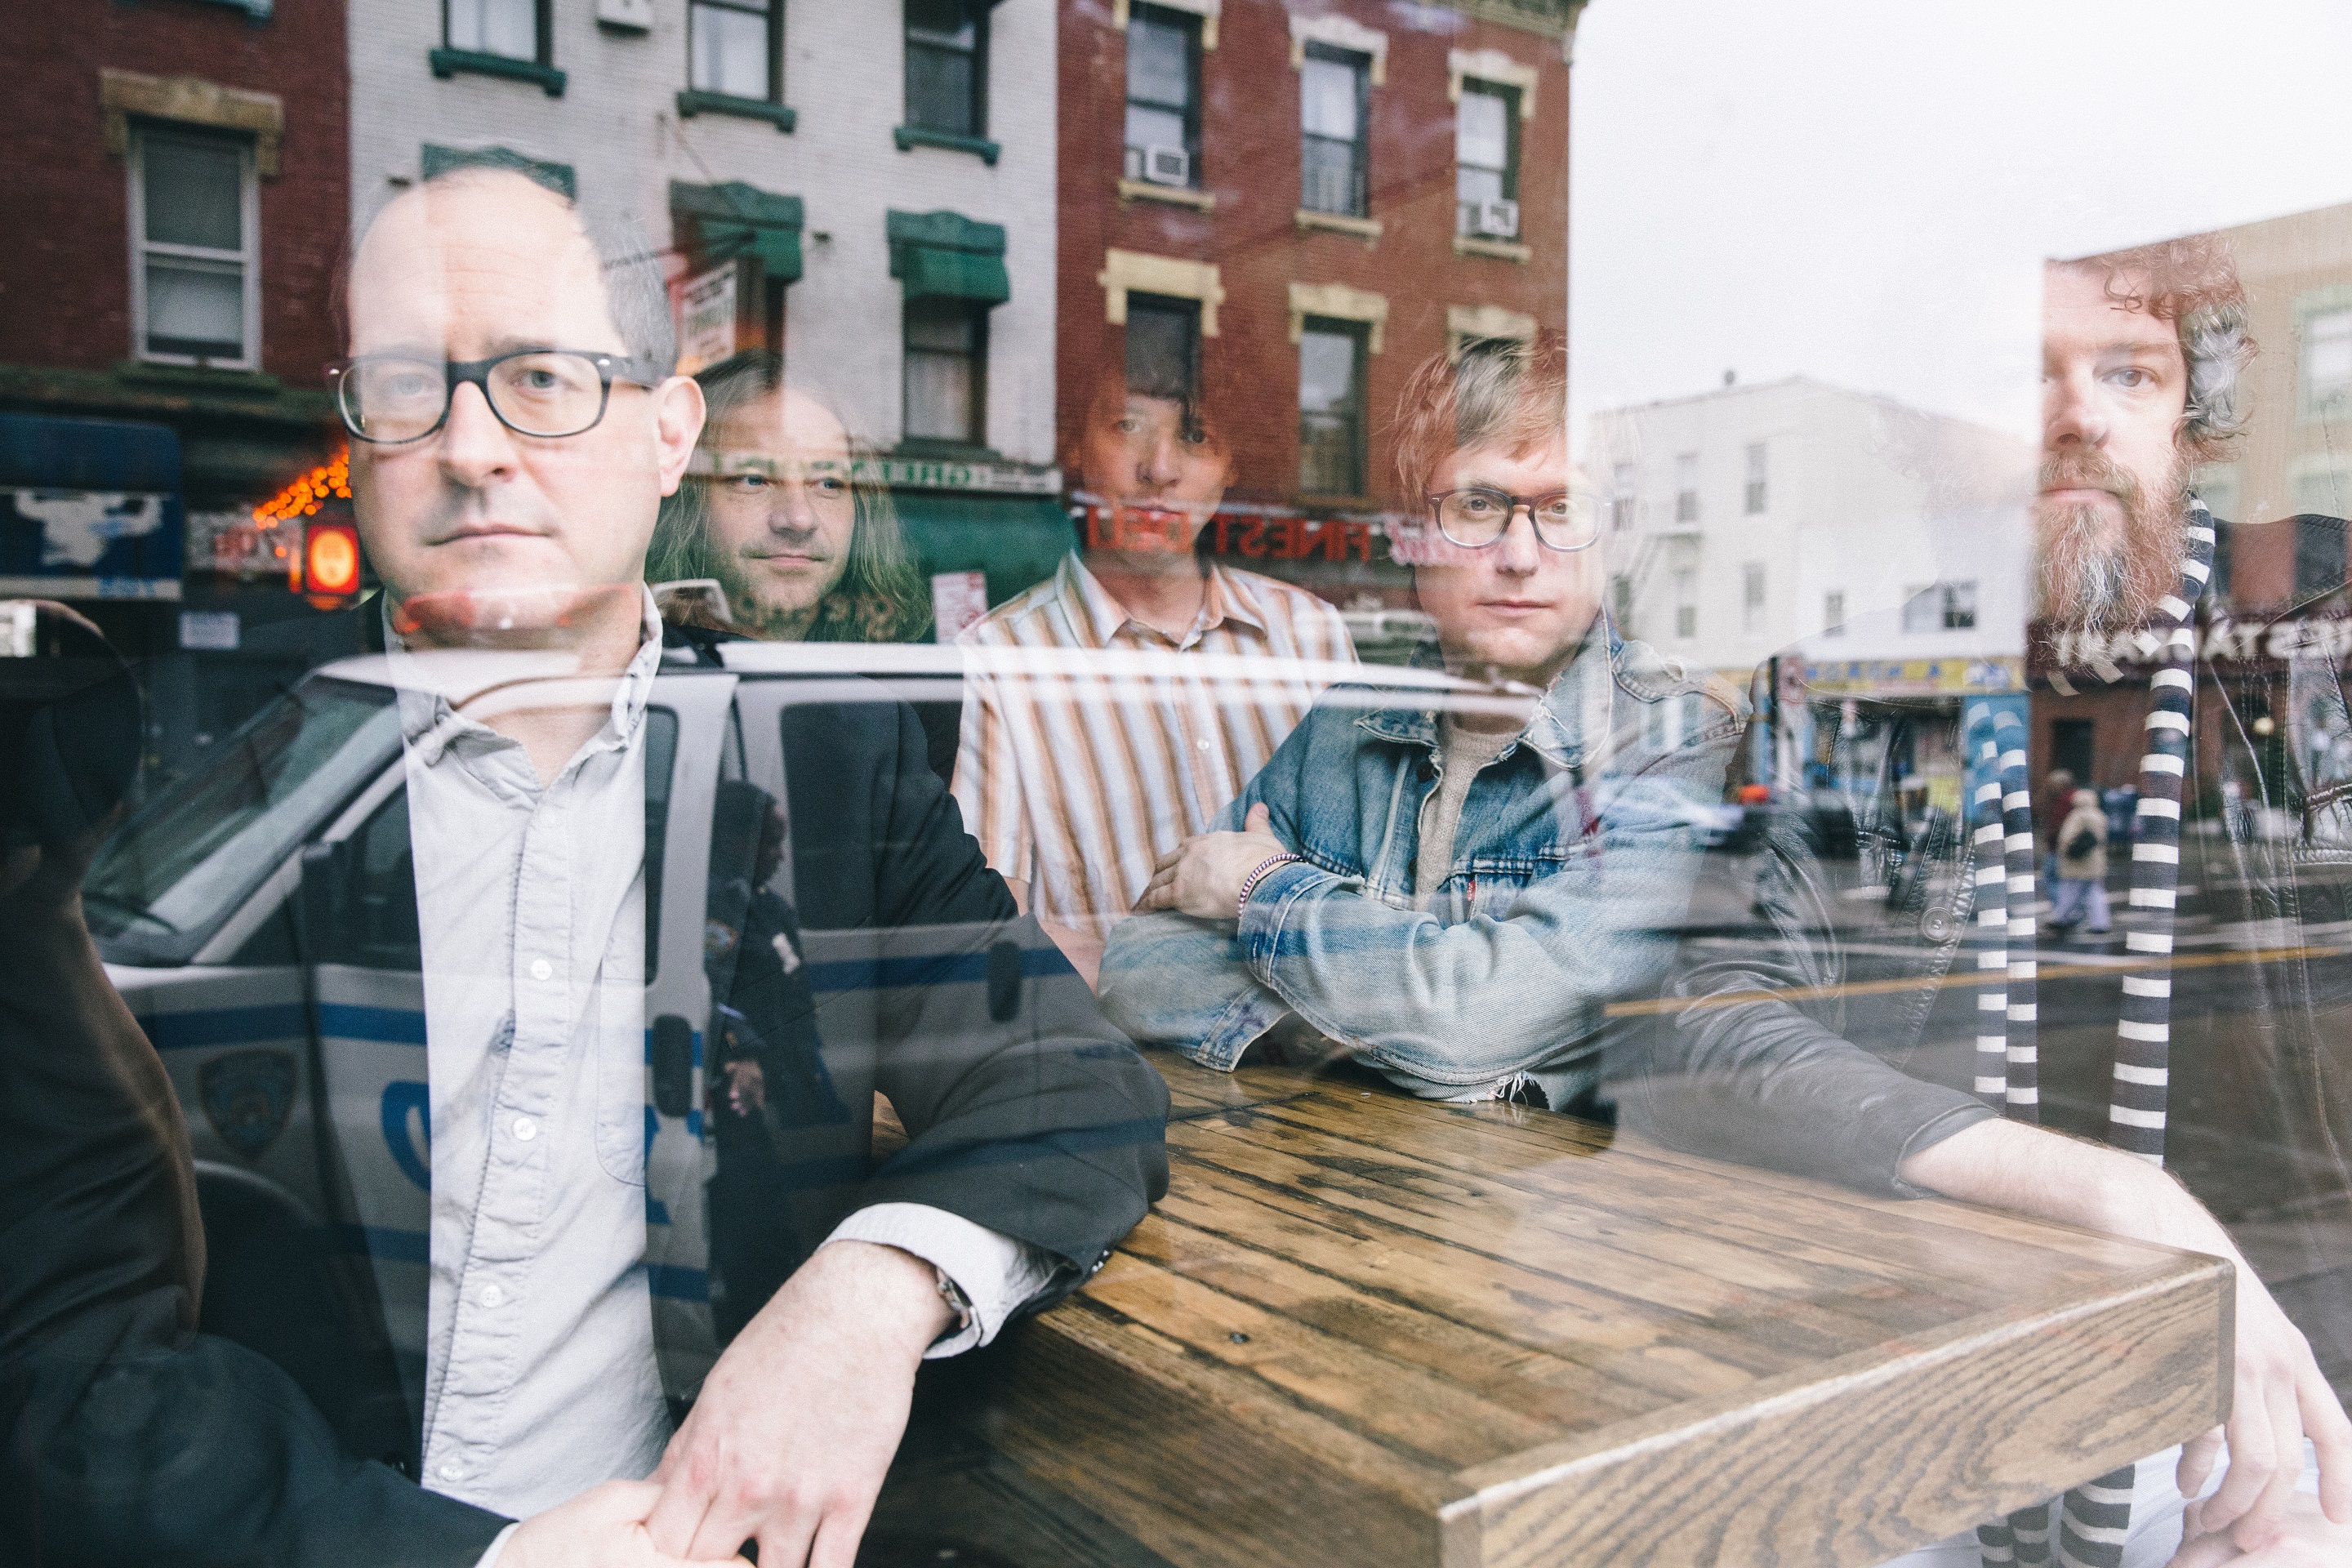 THE HOLD STEADY’S “MASSIVE NIGHT” IN ITHACA